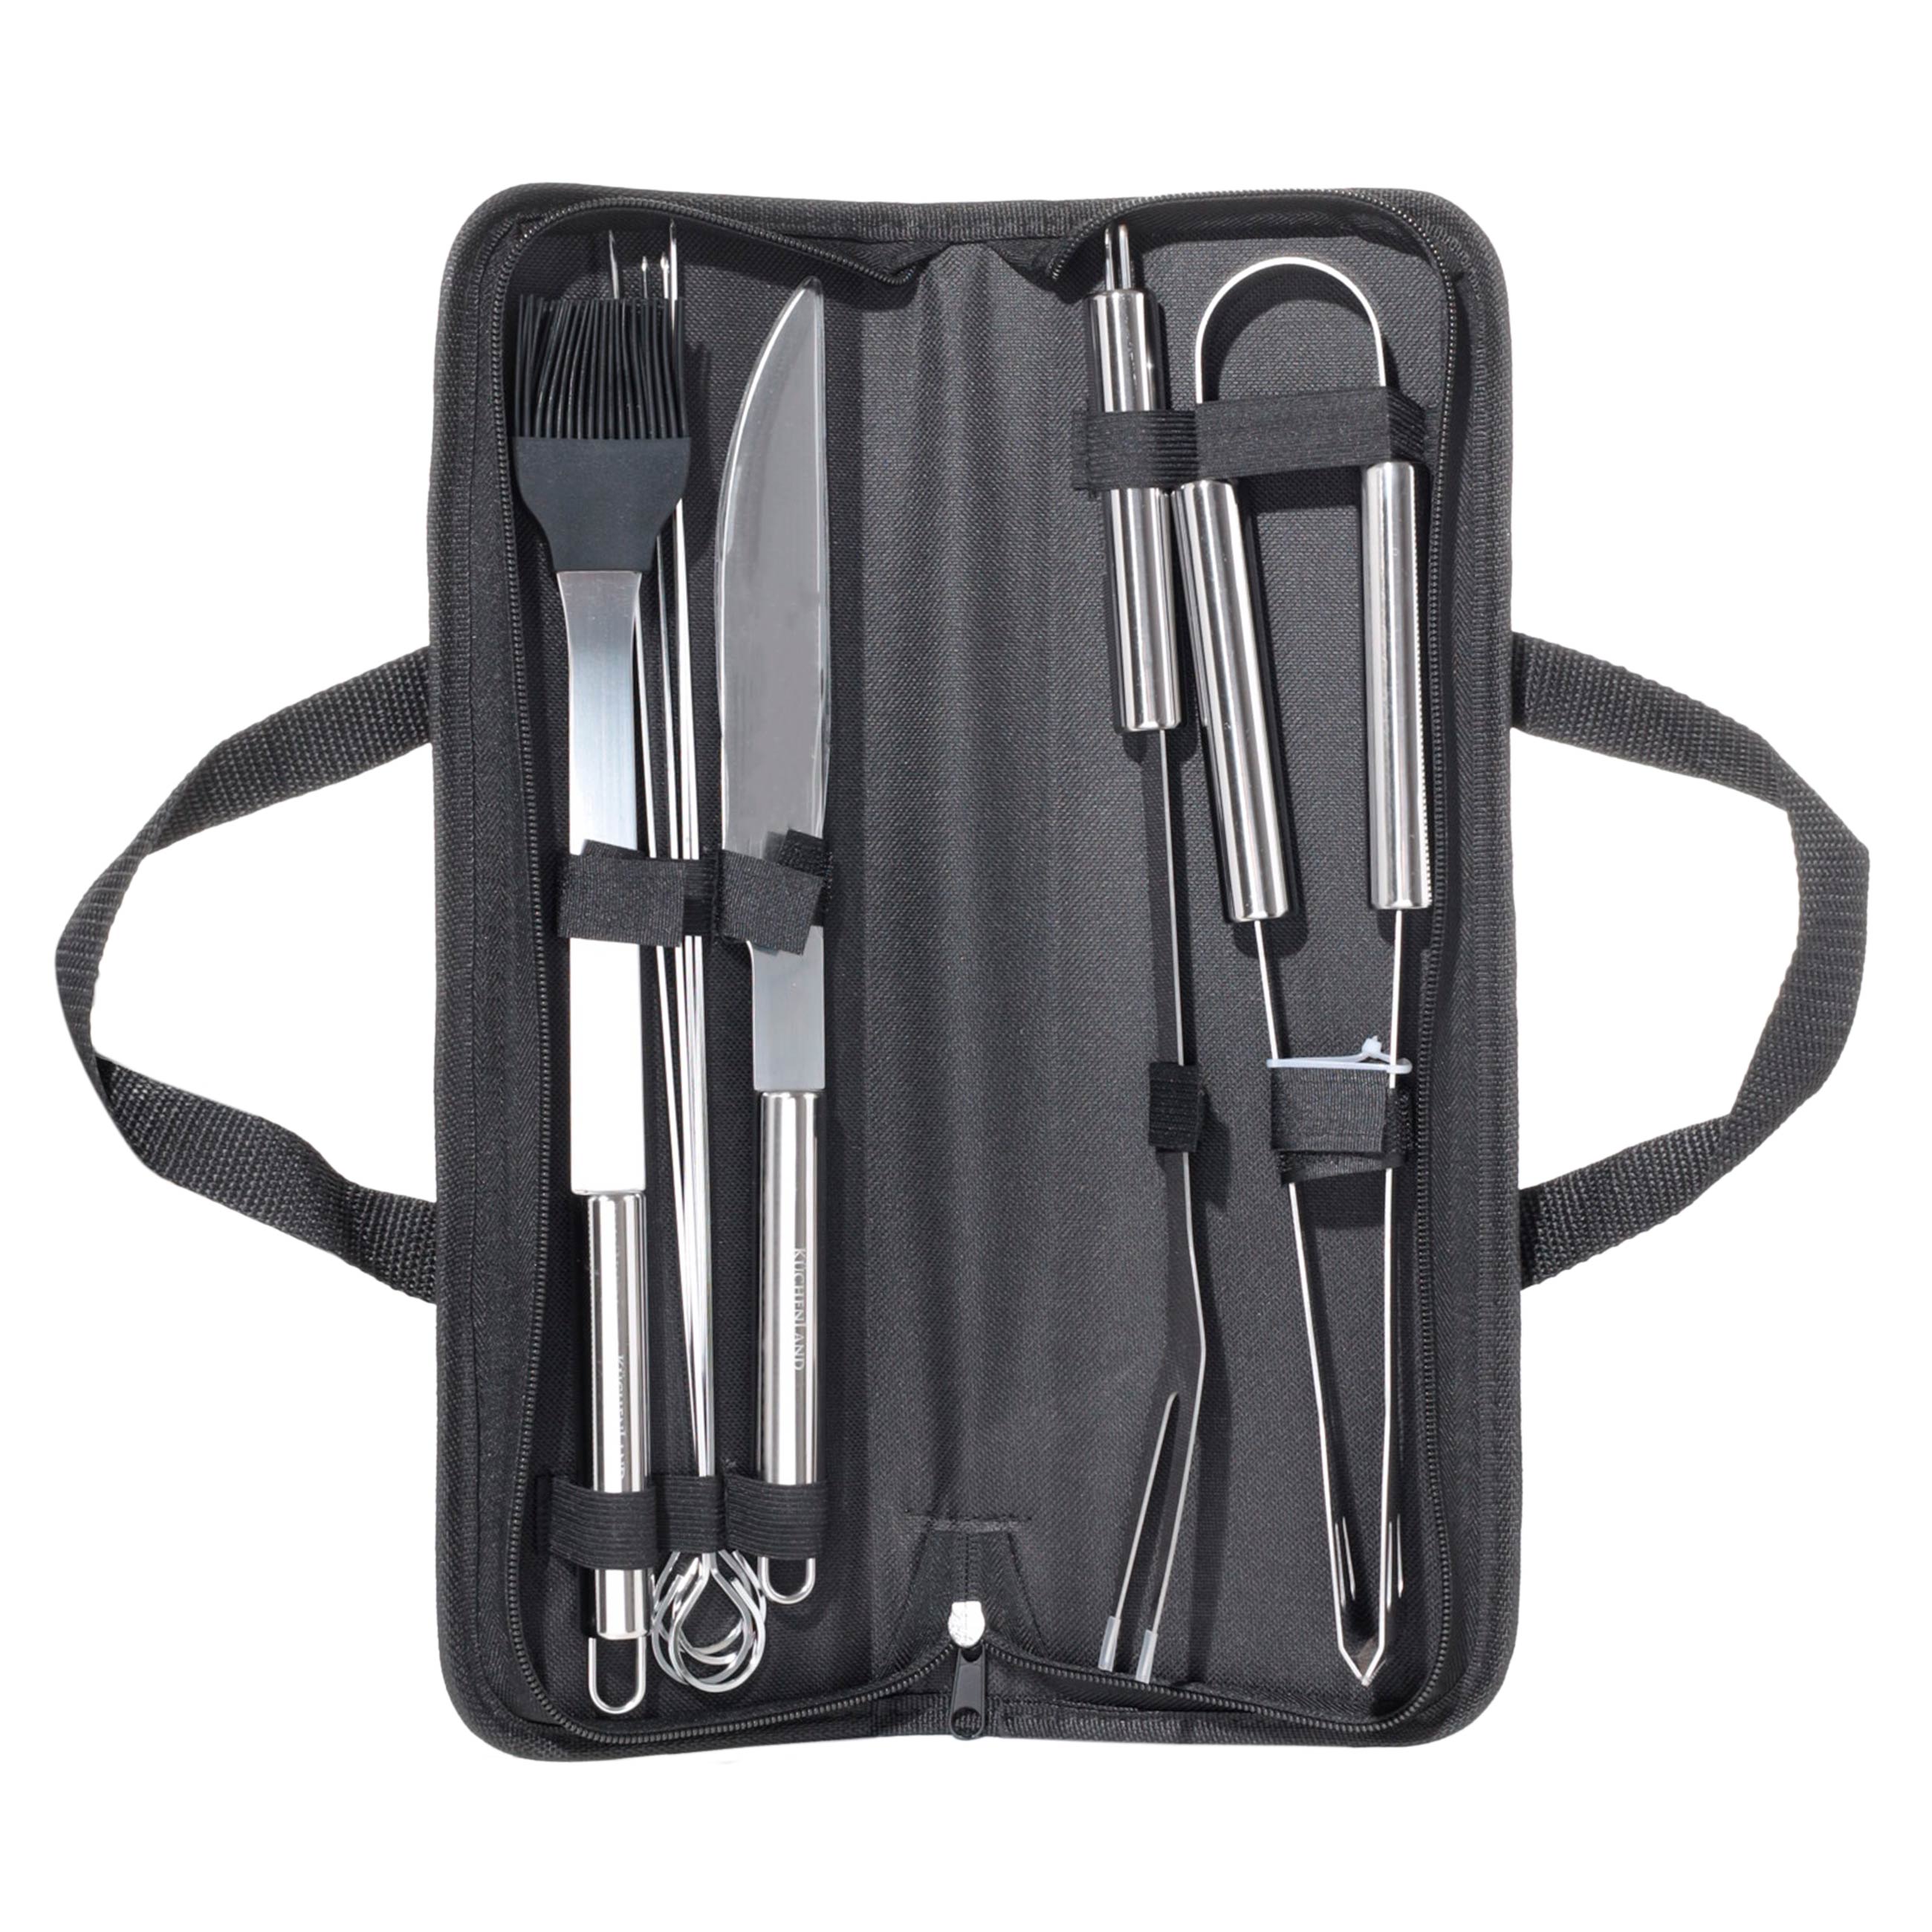 BBQ set, 8 pcs, in a leather case, steel / silicone / eco-leather, BBQ изображение № 2